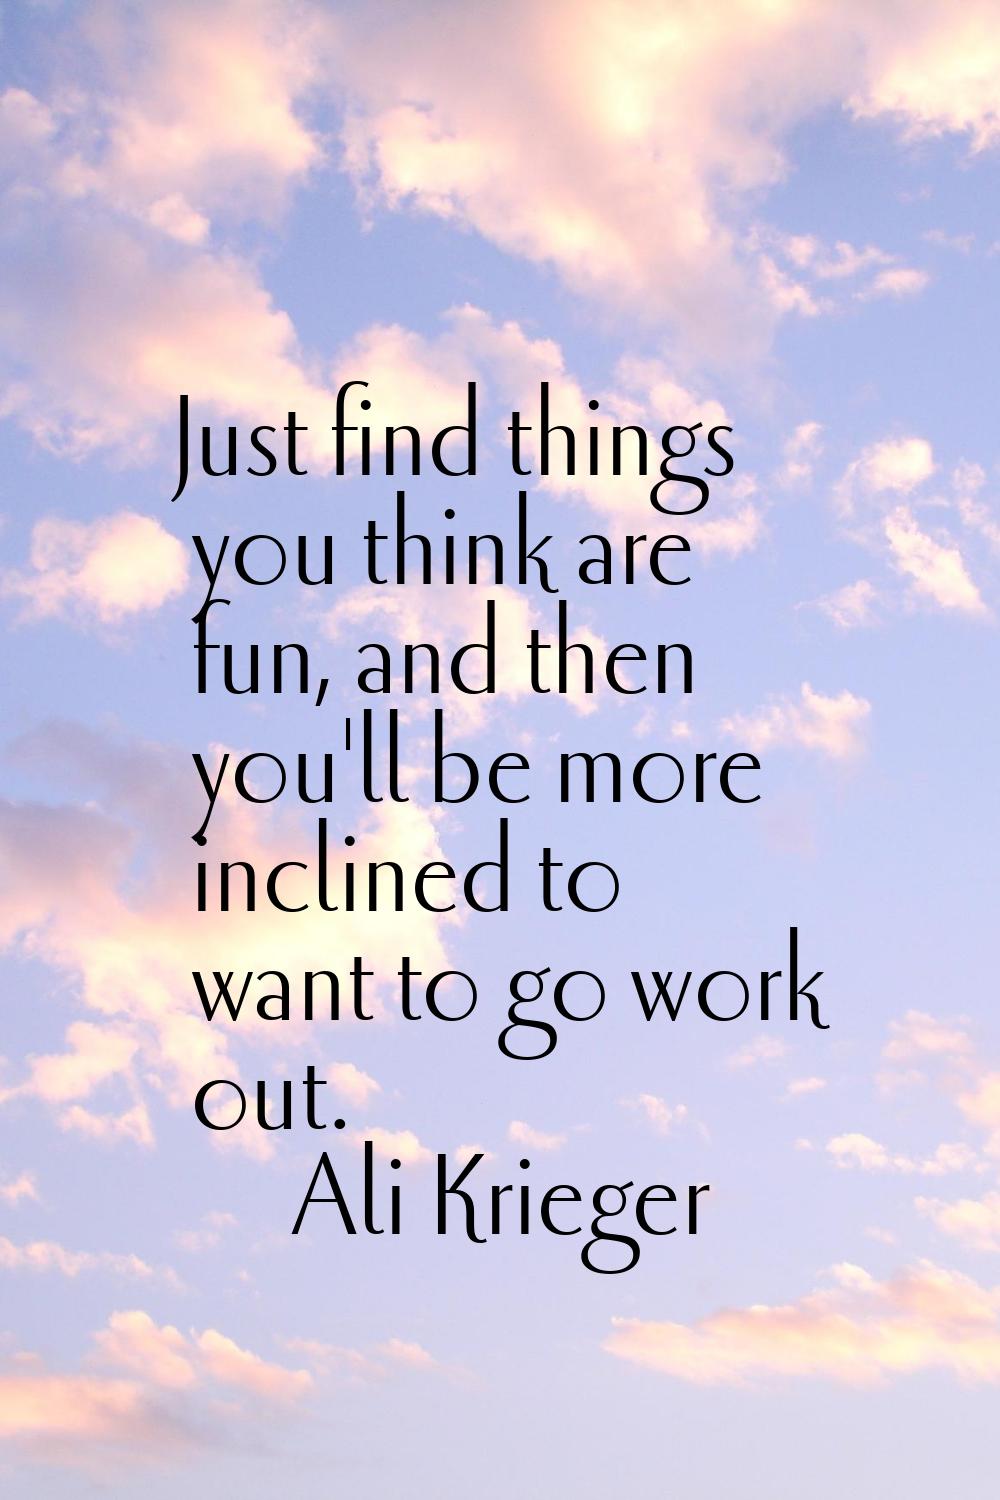 Just find things you think are fun, and then you'll be more inclined to want to go work out.